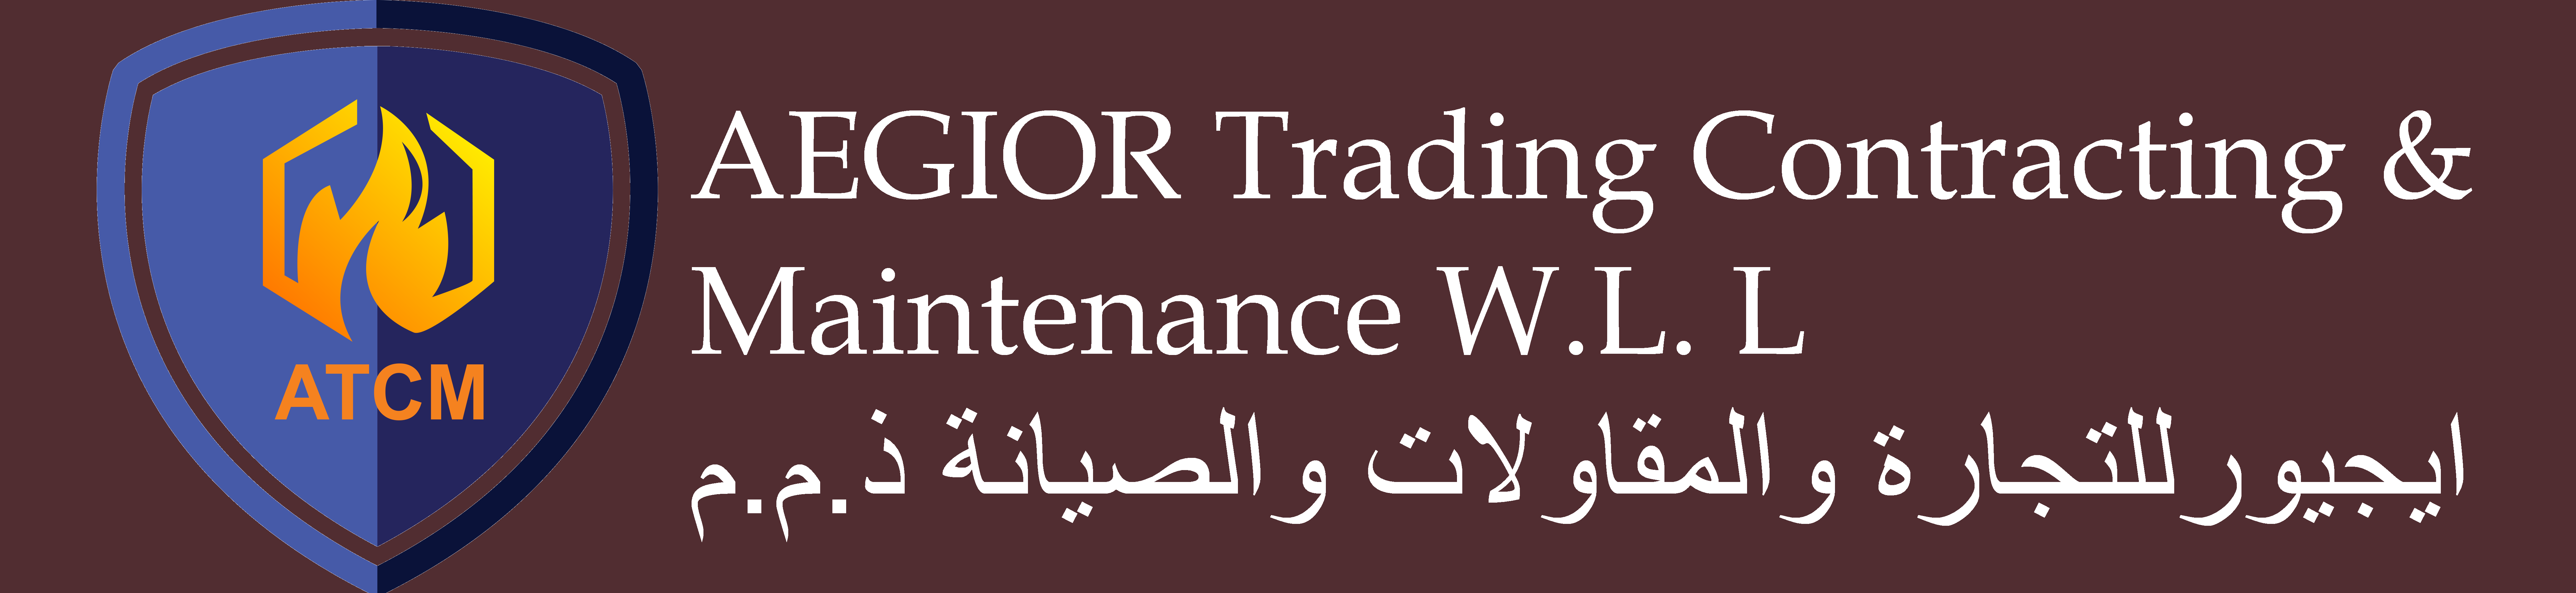 Aegior Trading Contract & Maintenance - Fire Safety Qatar